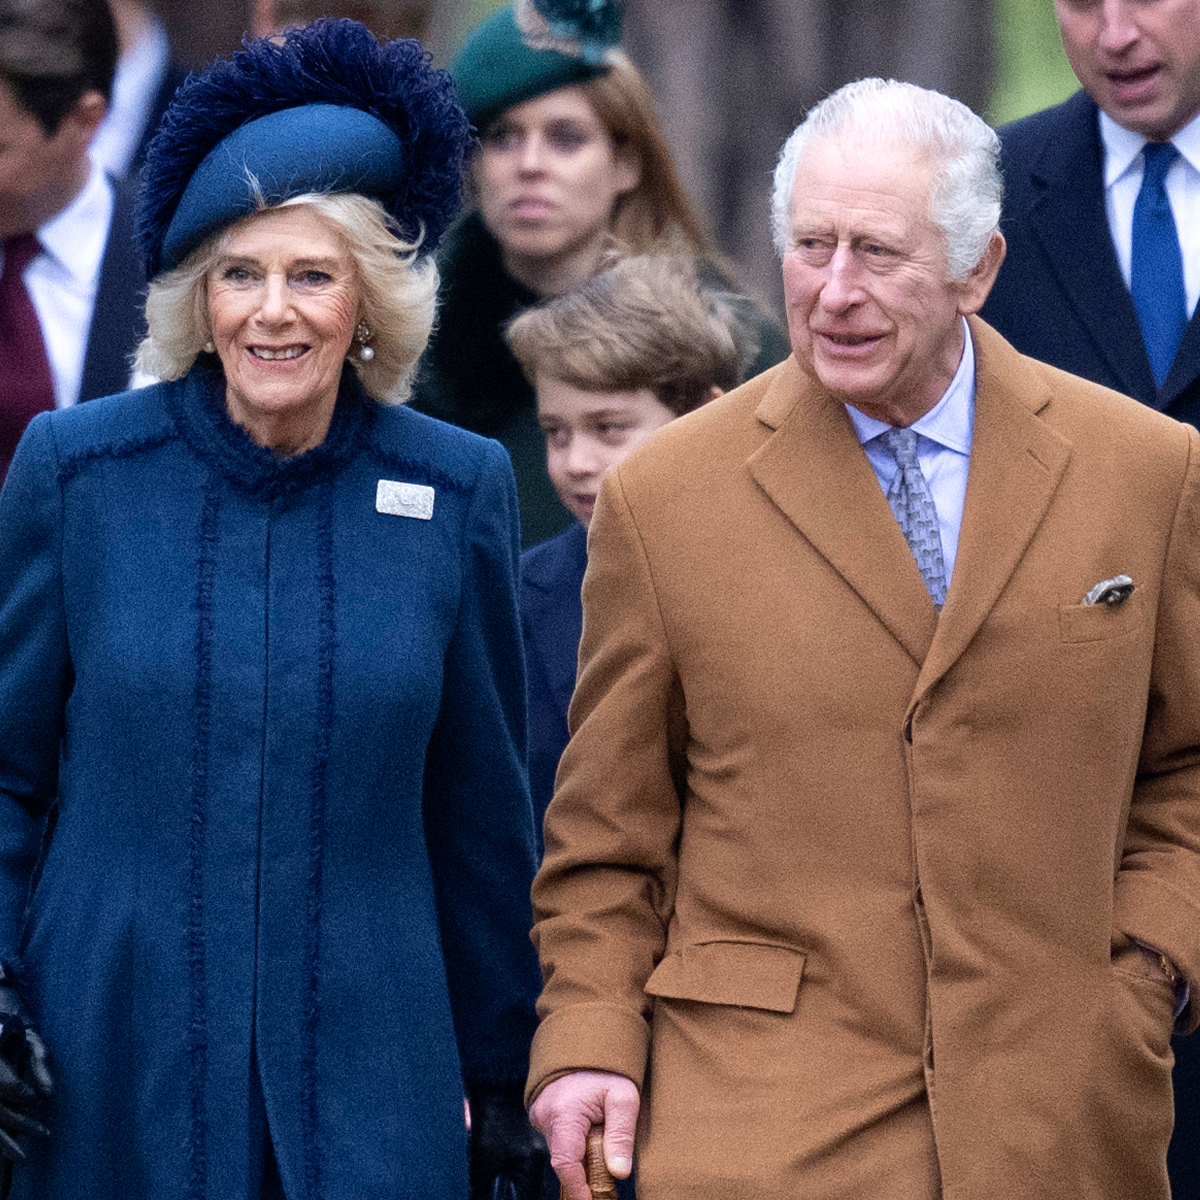 Prince William, the Queen and More Royals Attend the Order of the